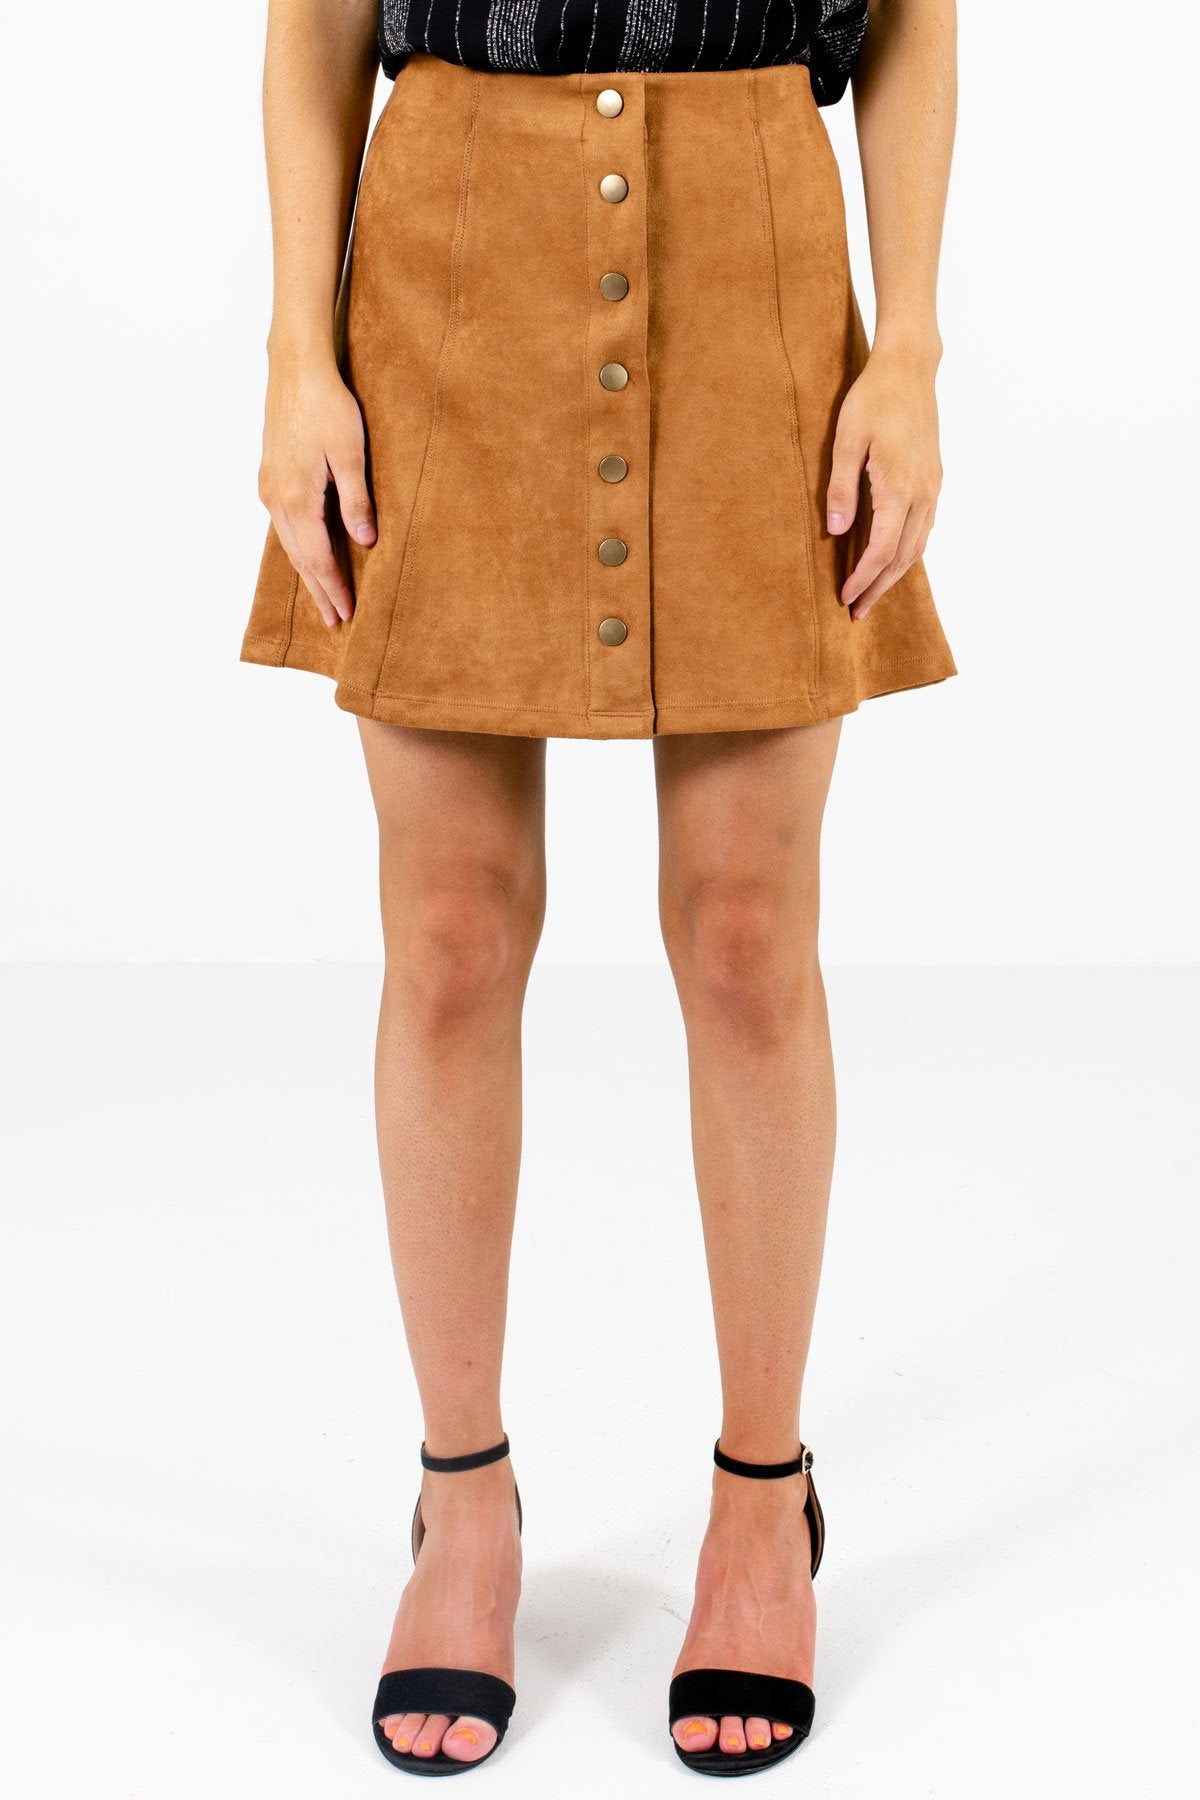 Camel Brown High-Quality Suede Material Boutique Mini Skirts for Women